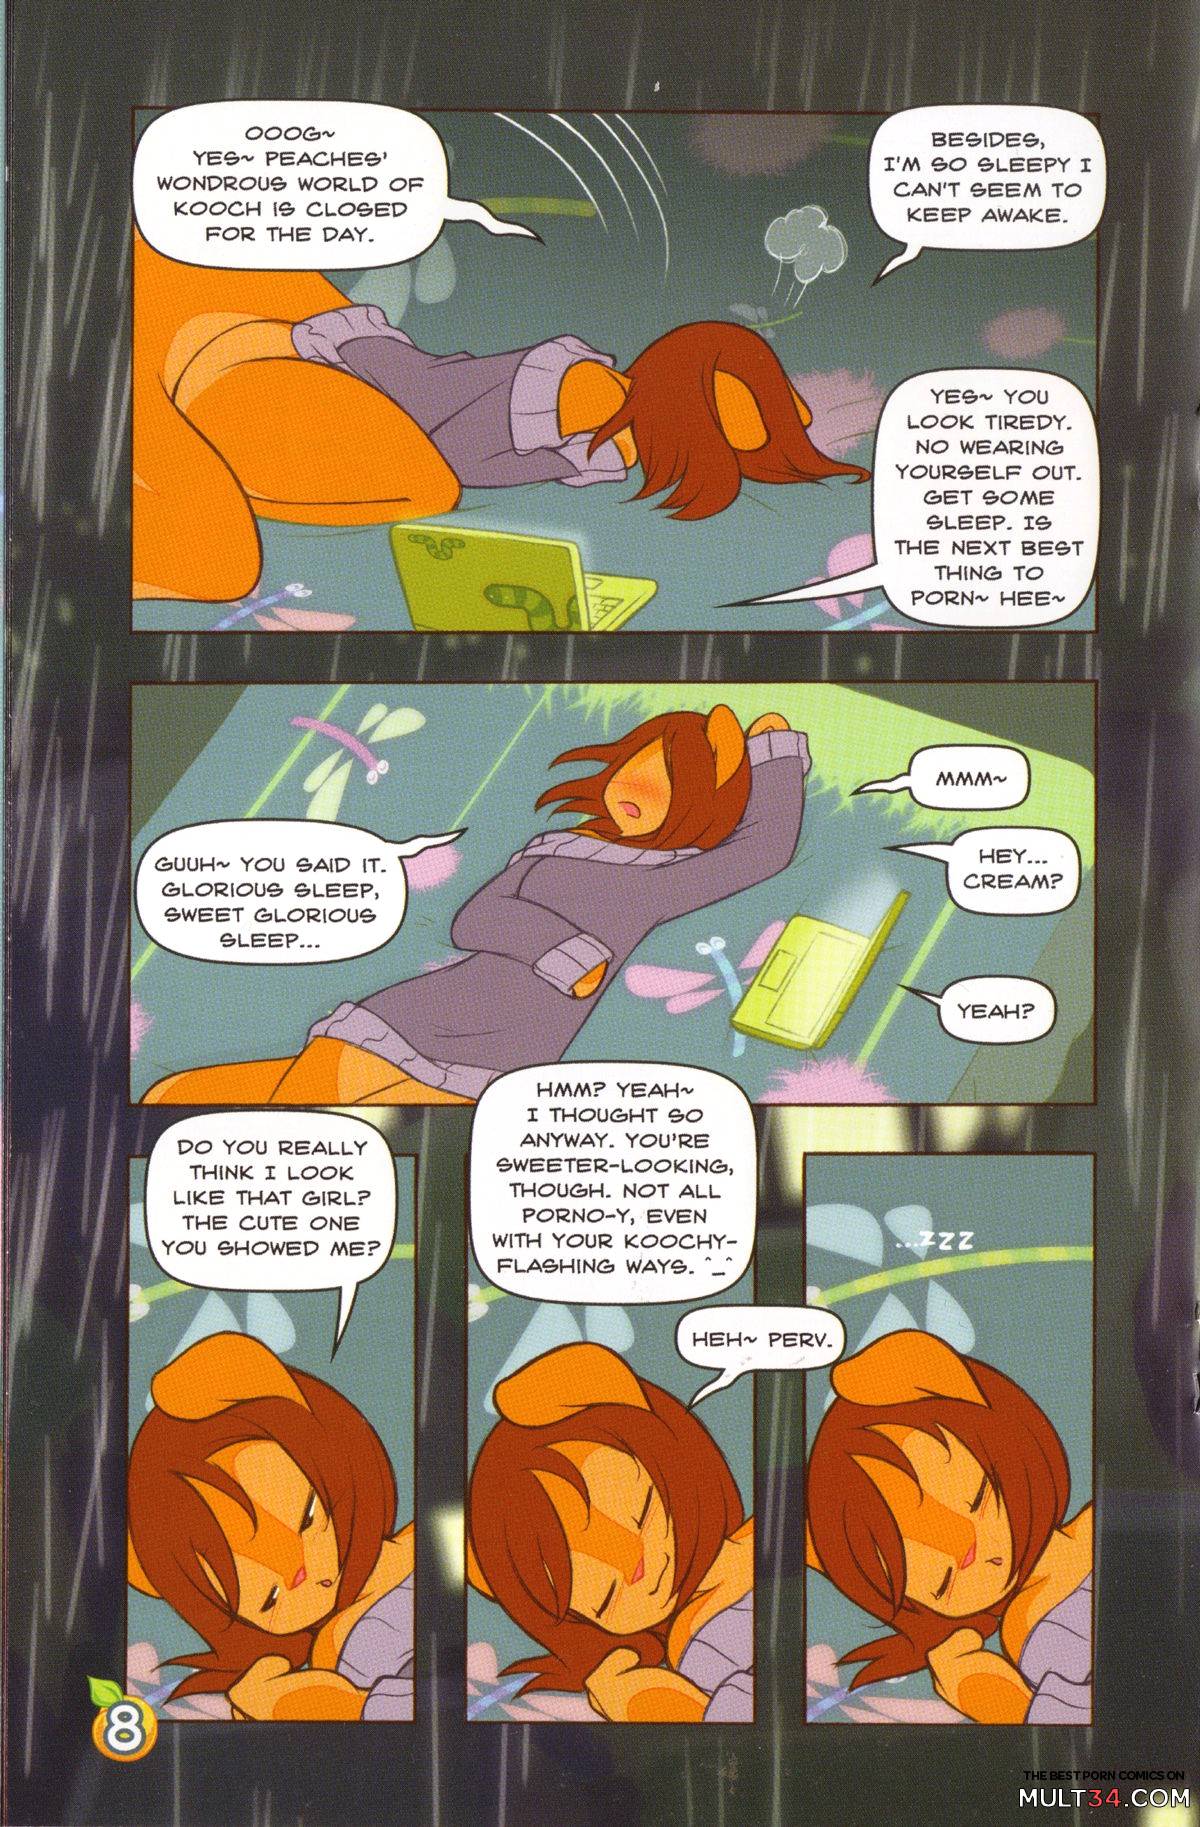 Peaches and Cream - Pillow Talk page 10